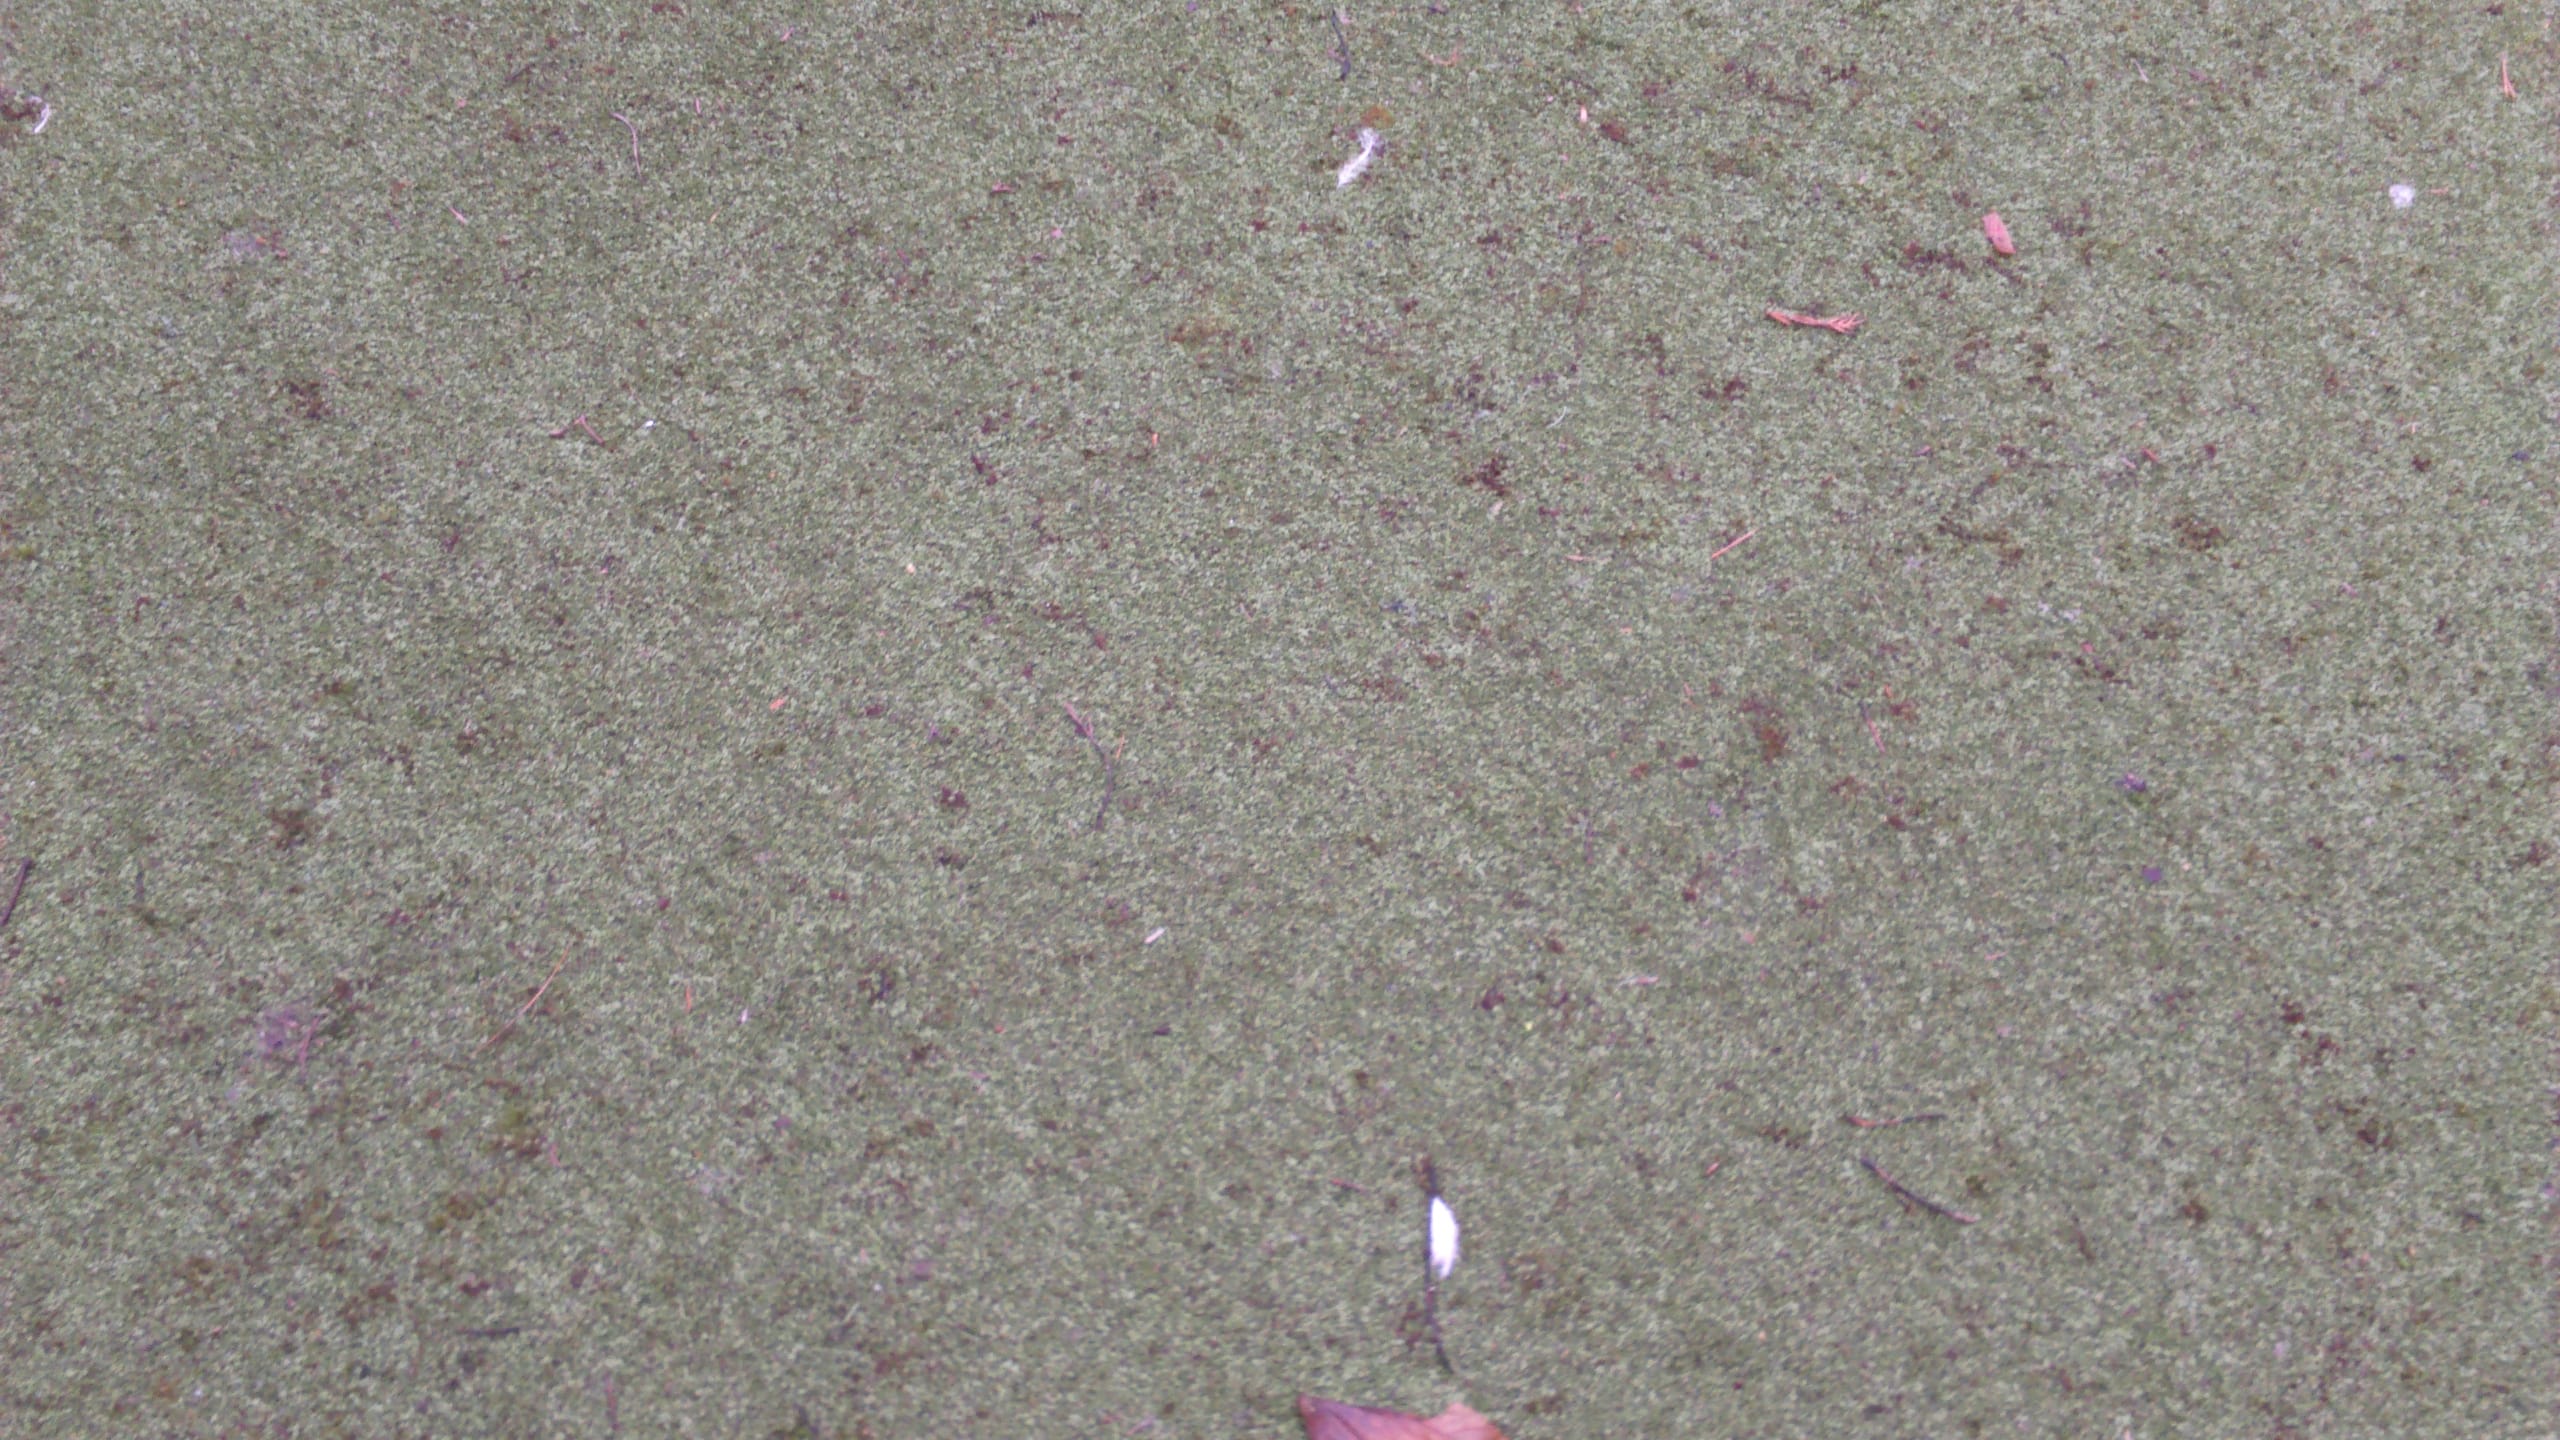 Artificial Turf Surface Close Up full of contaminants